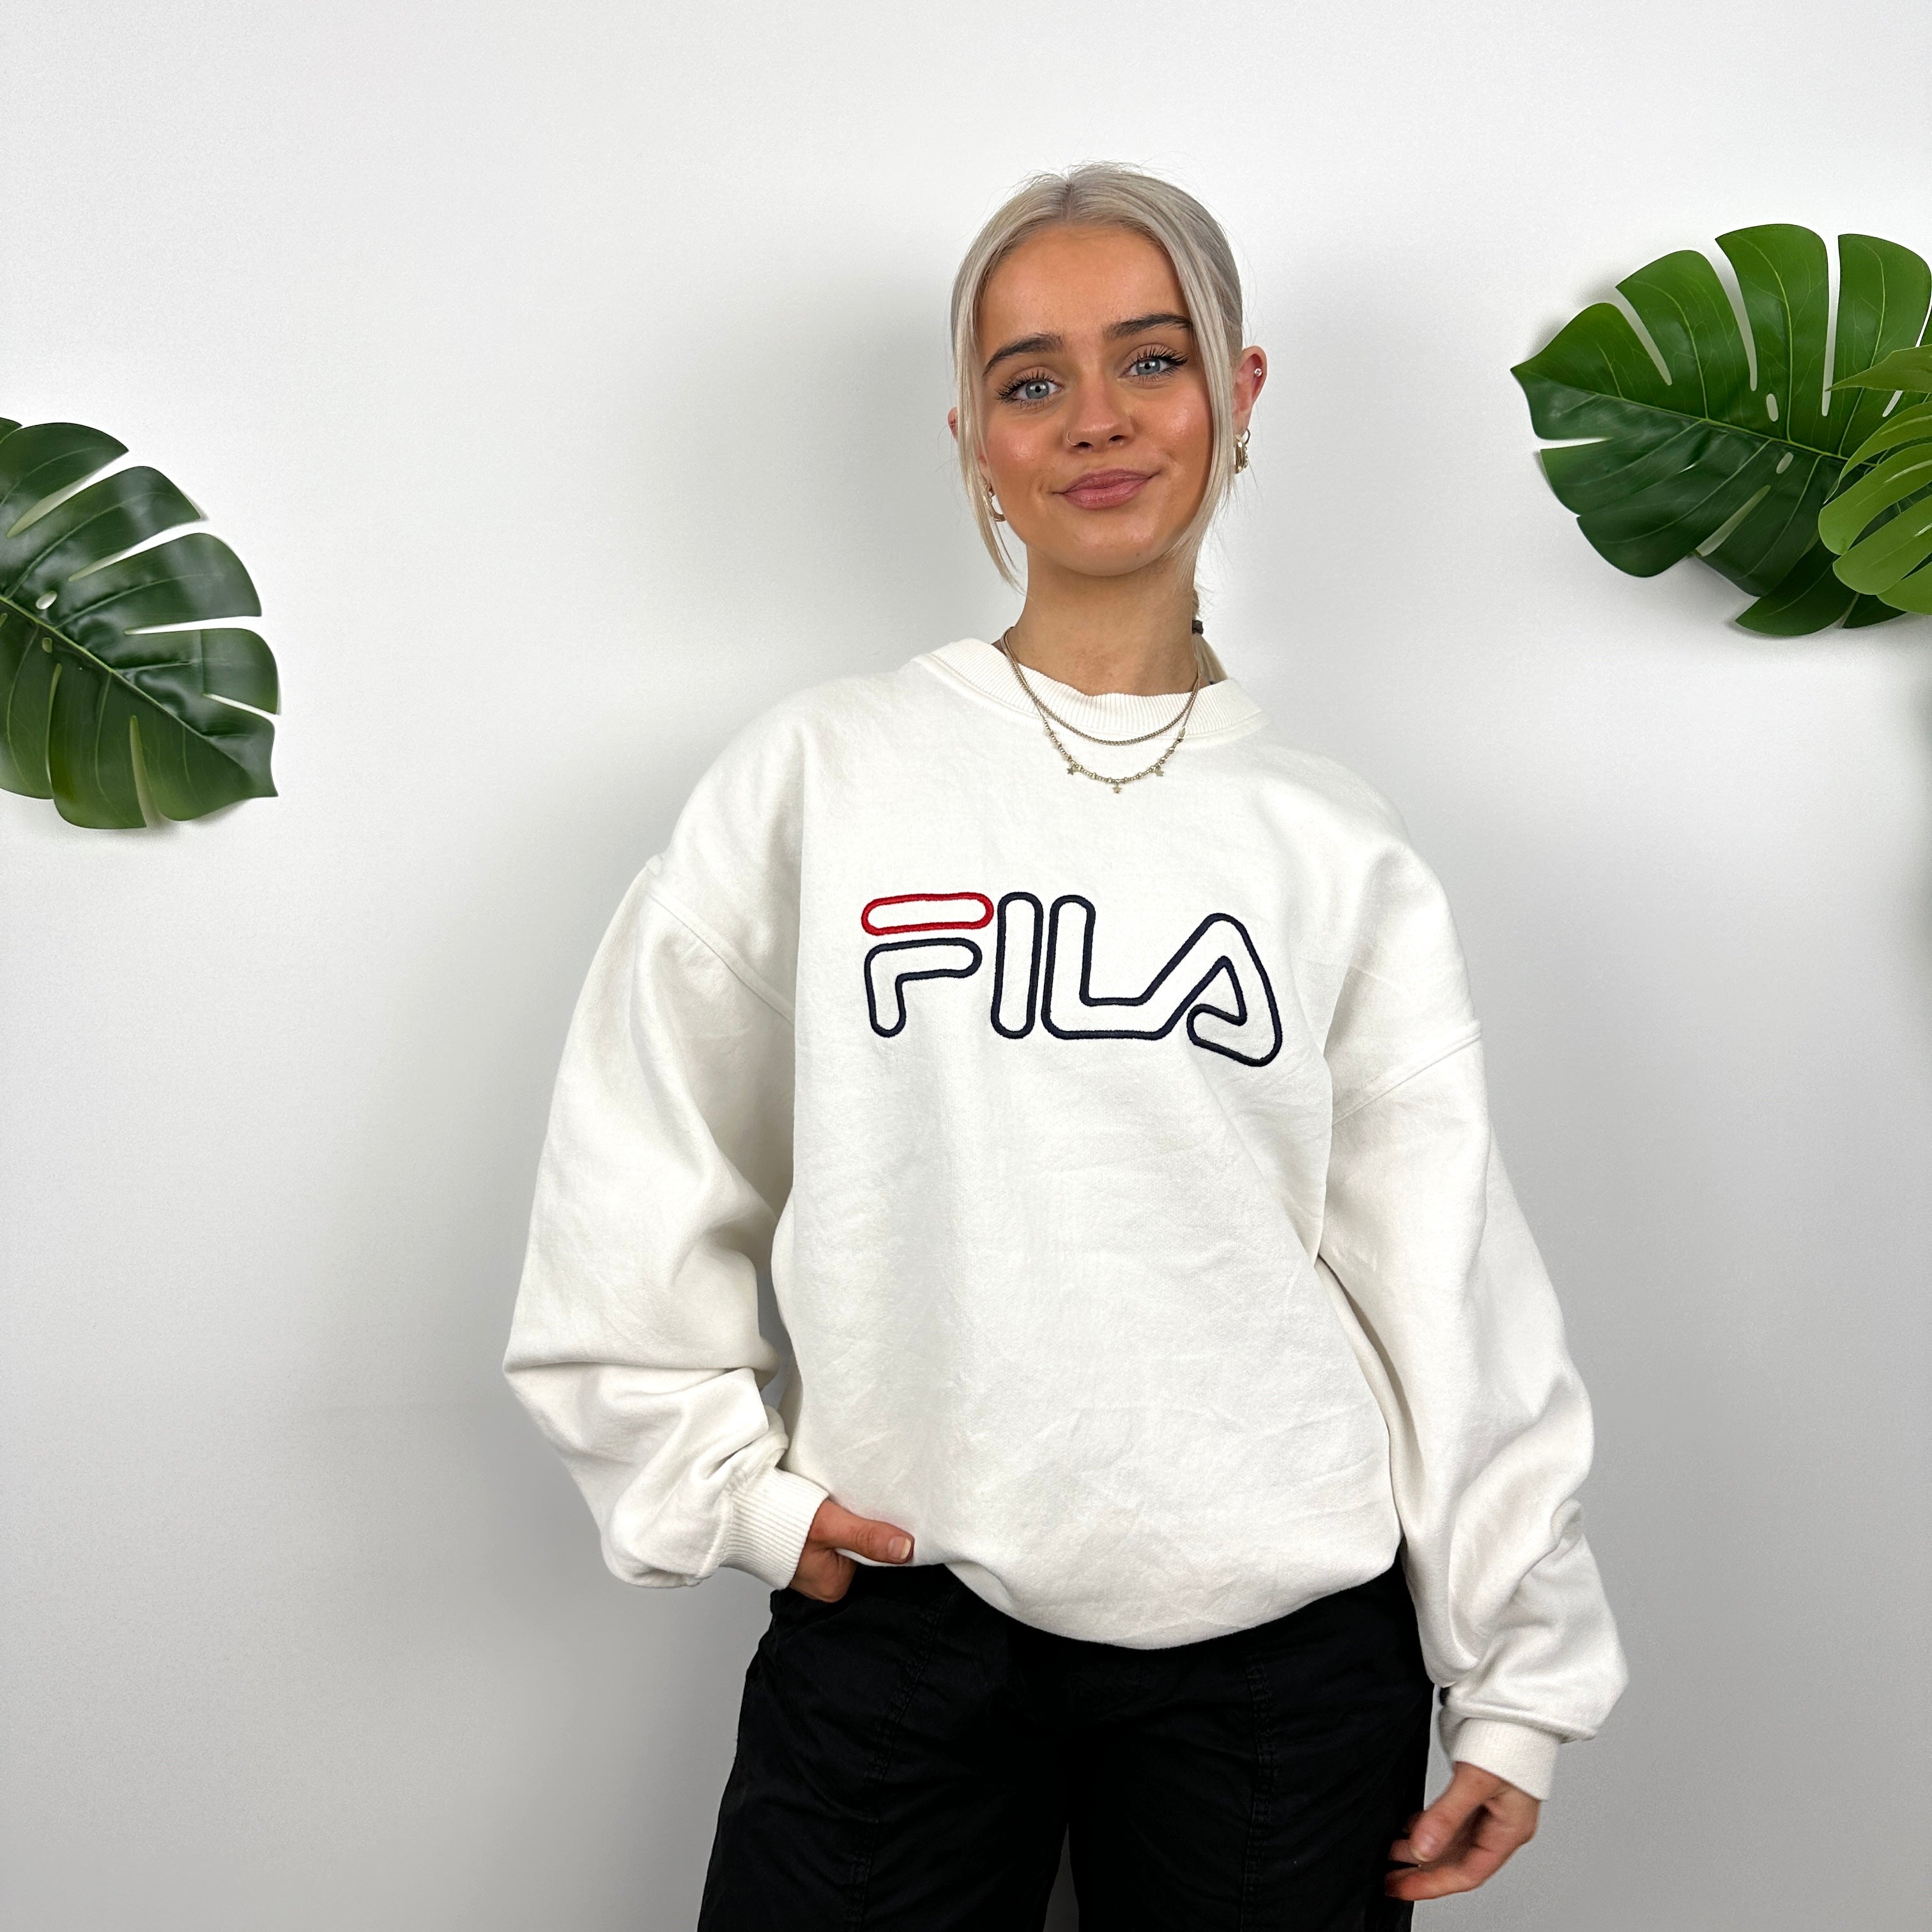 FILA White Embroidered Spell Out Sweatshirt (M)